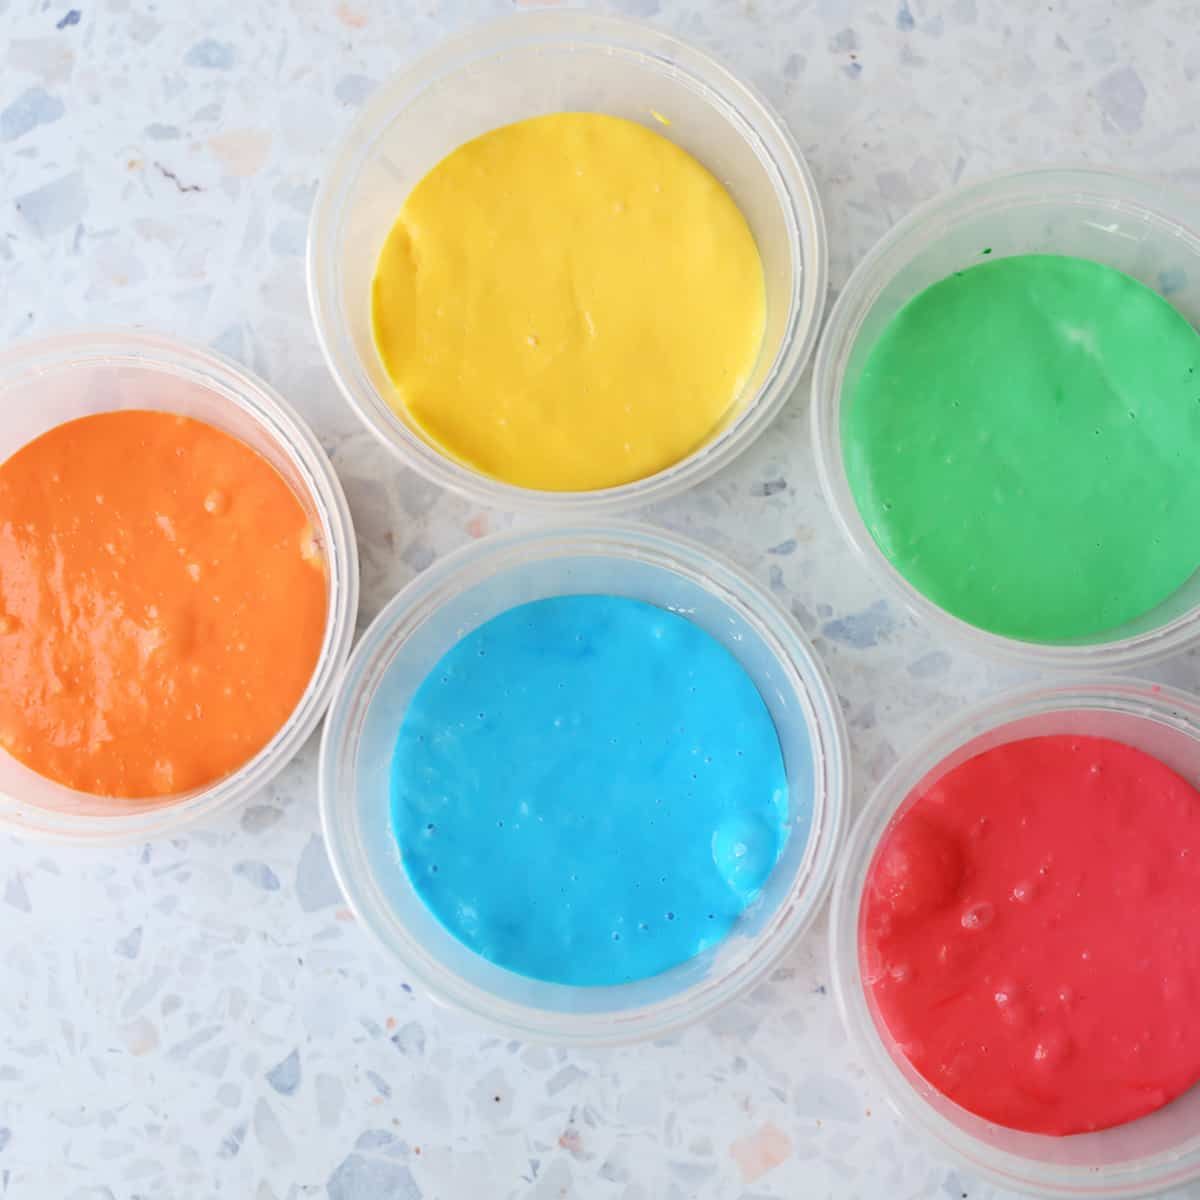 4 Ways to Store Slime - wikiHow